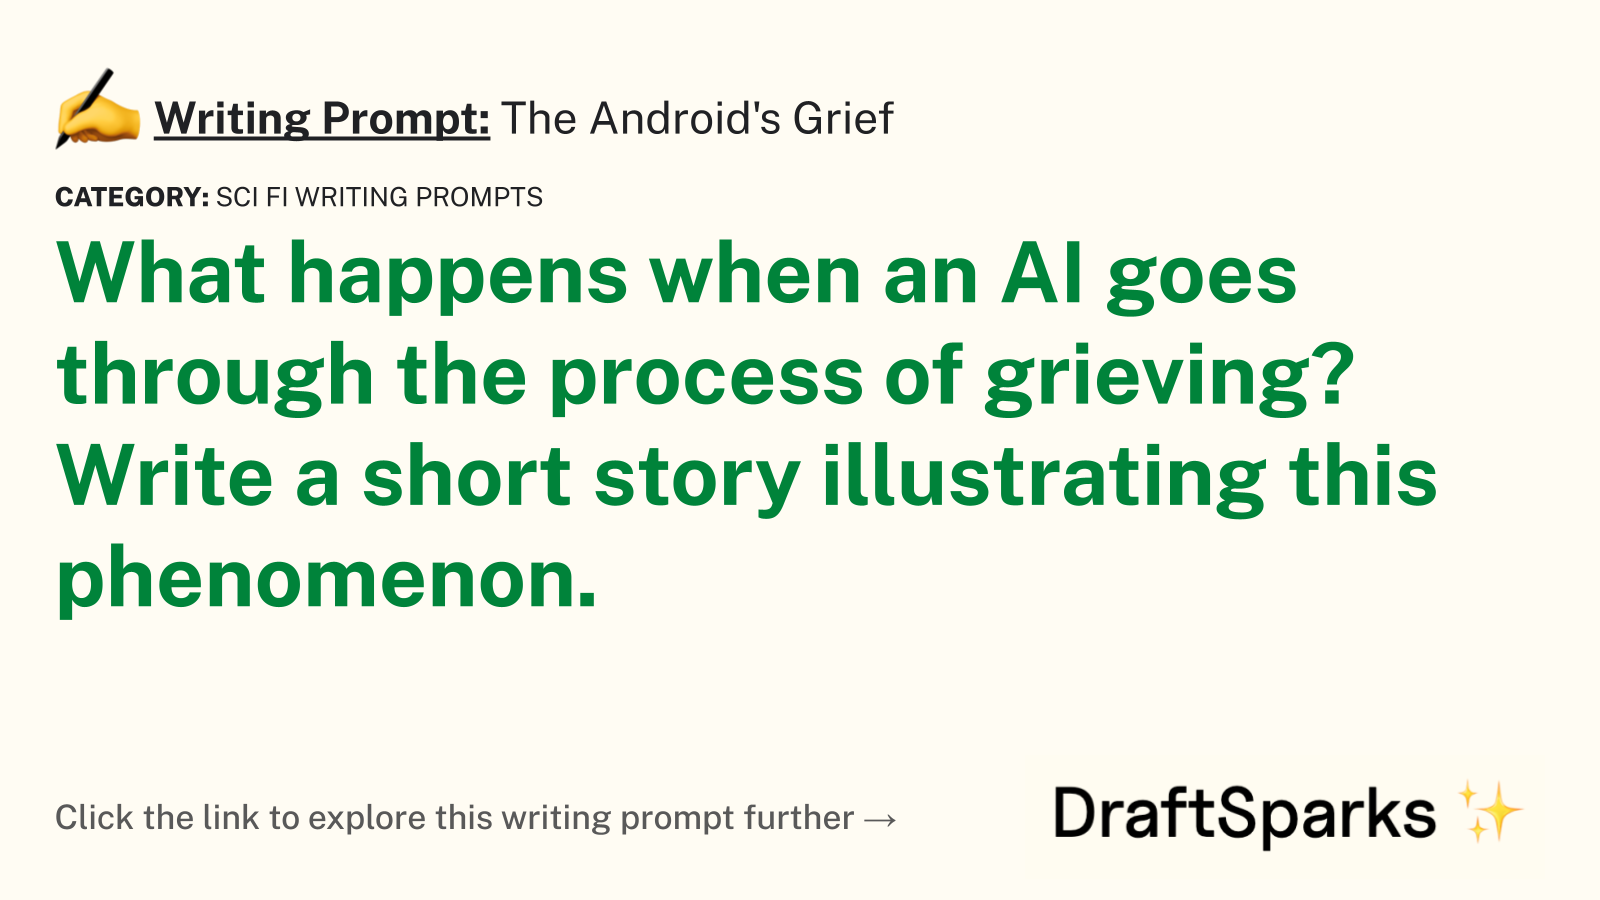 The Android’s Grief